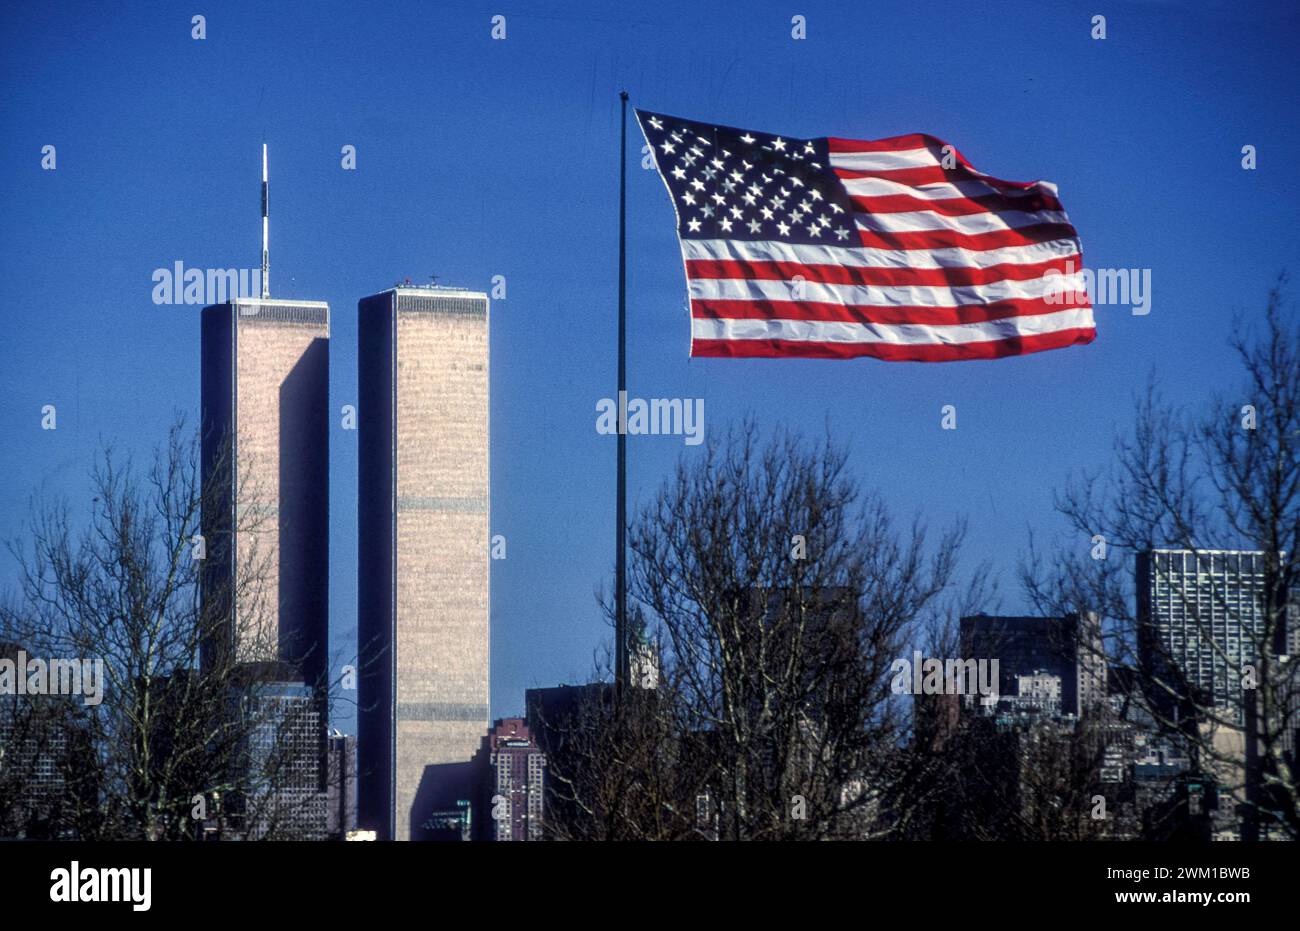 4066802 New York, 1989, Twins Towers and American flag; (add.info.: New York (1989) New York (1989). Torri Gemelle e bandiera americana); © Marcello Mencarini. All rights reserved 2024. Stock Photo